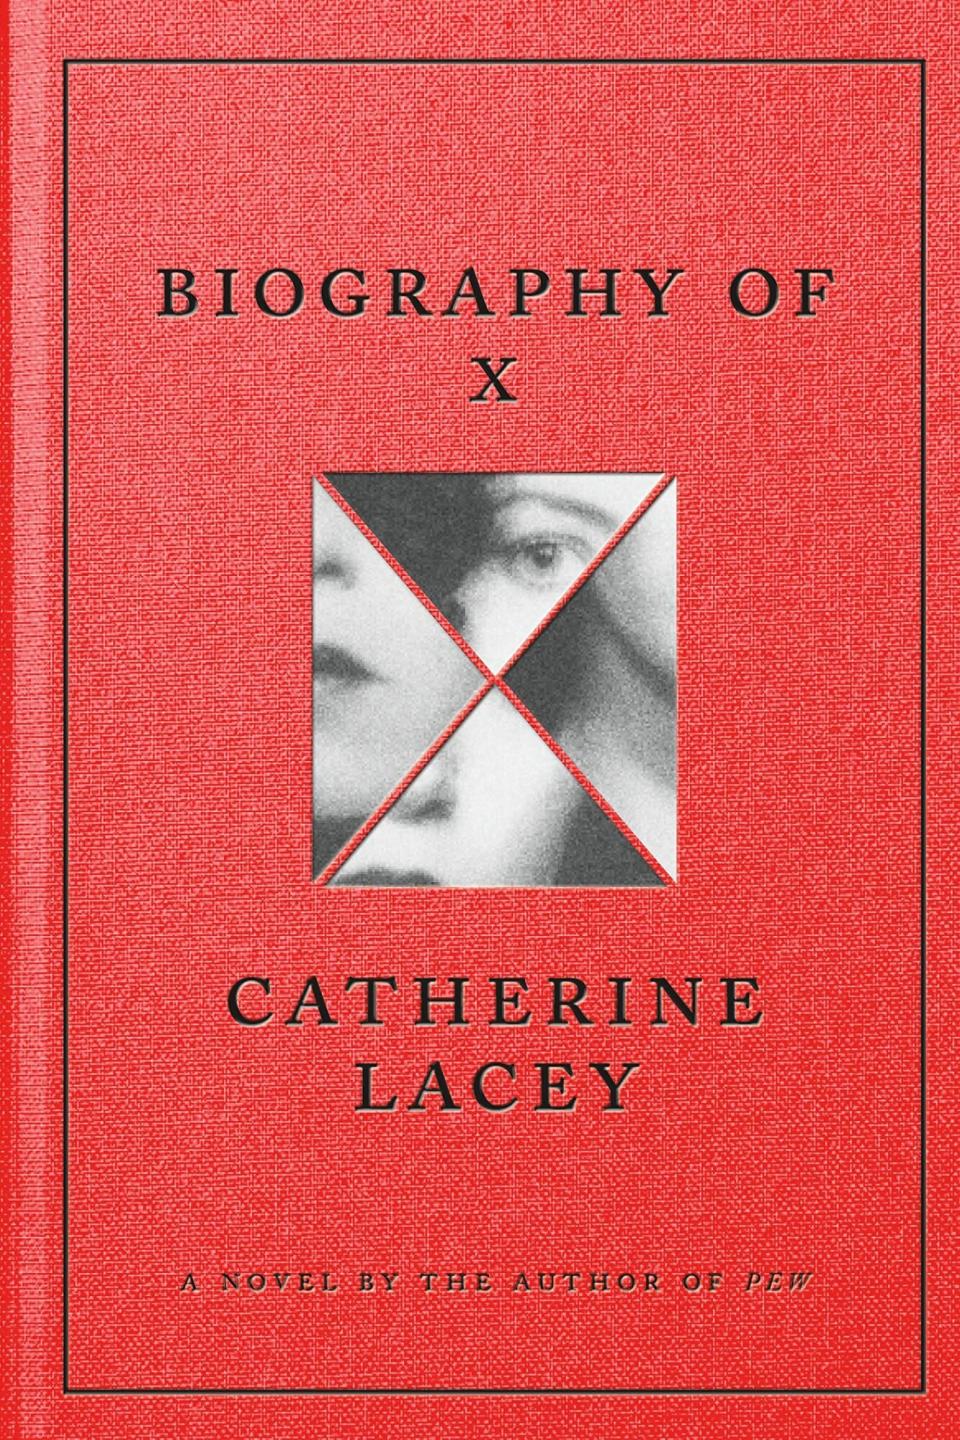 Biography of X&nbsp;by Catherine Lacey